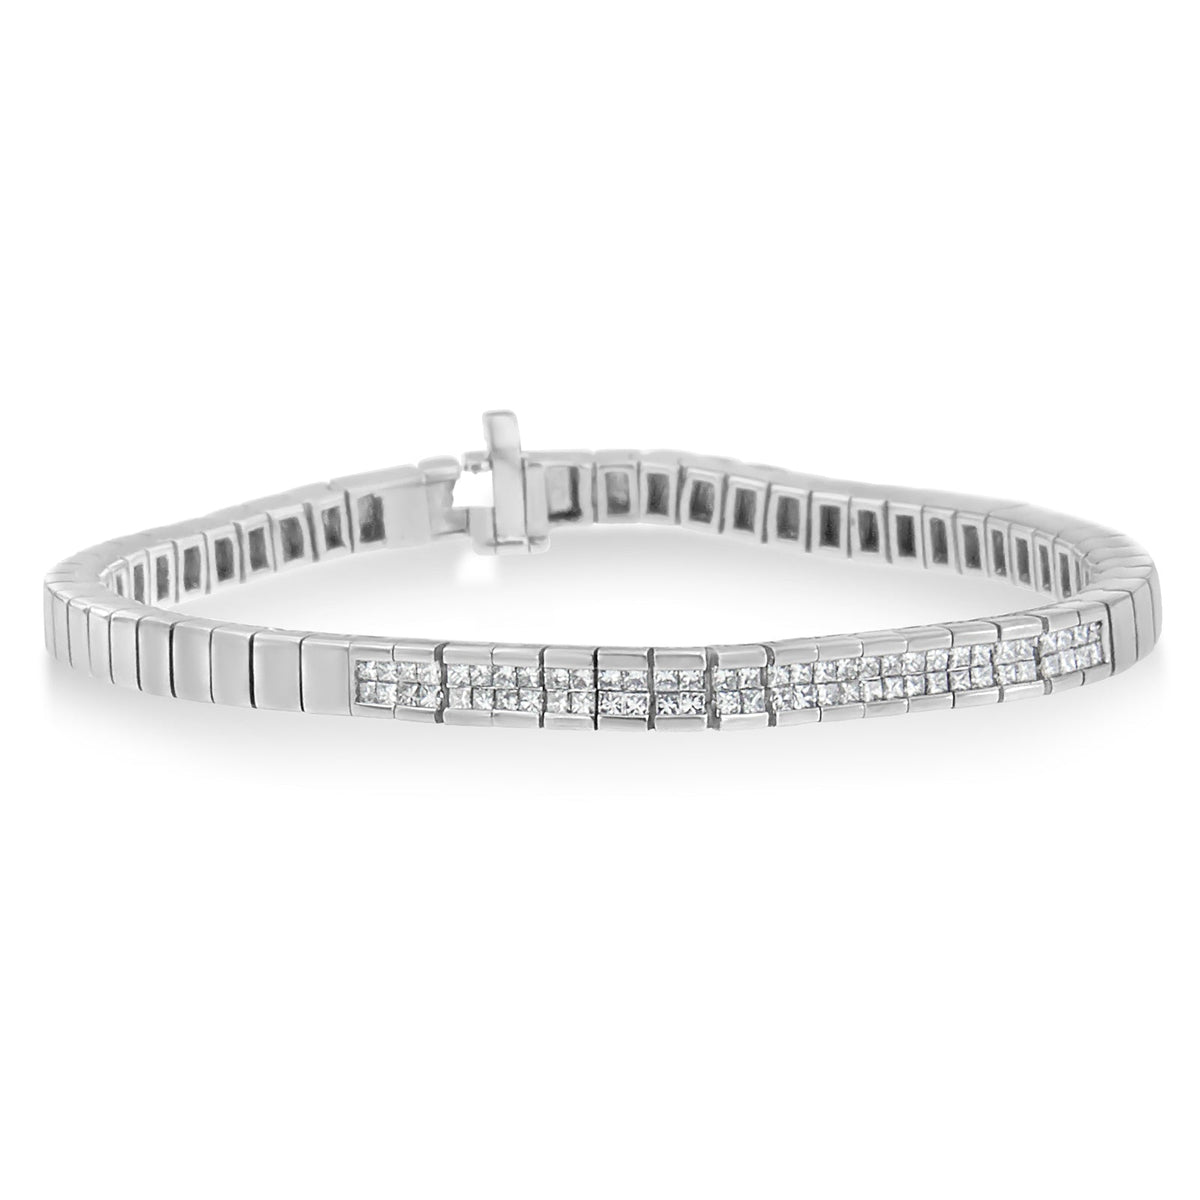 14K White Gold Princess Cut Diamond Bracelet (1.00 cttw, H-I Color, SI1-SI2 Clarity) - LinkagejewelrydesignLinkagejewelrydesign